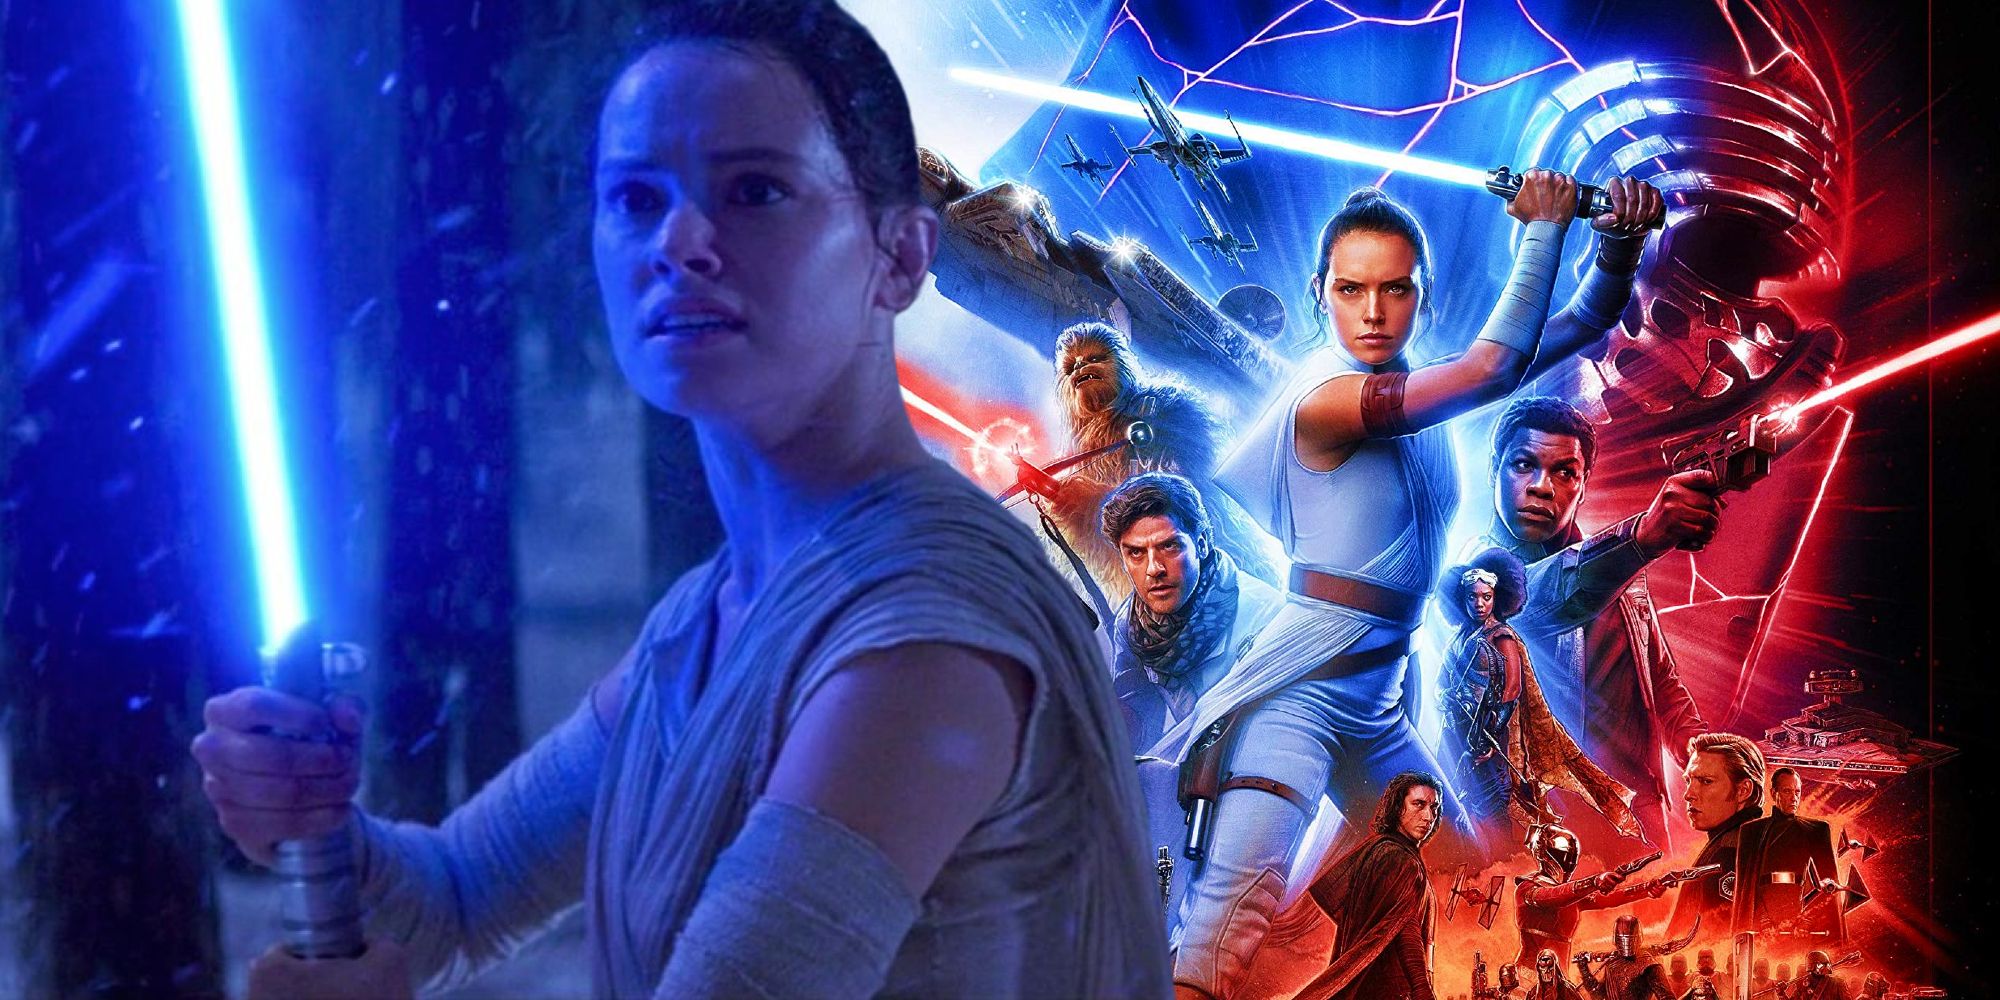 daisy-ridley-teases-unexpected-changes-for-rey-in-her-next-star-wars-movie